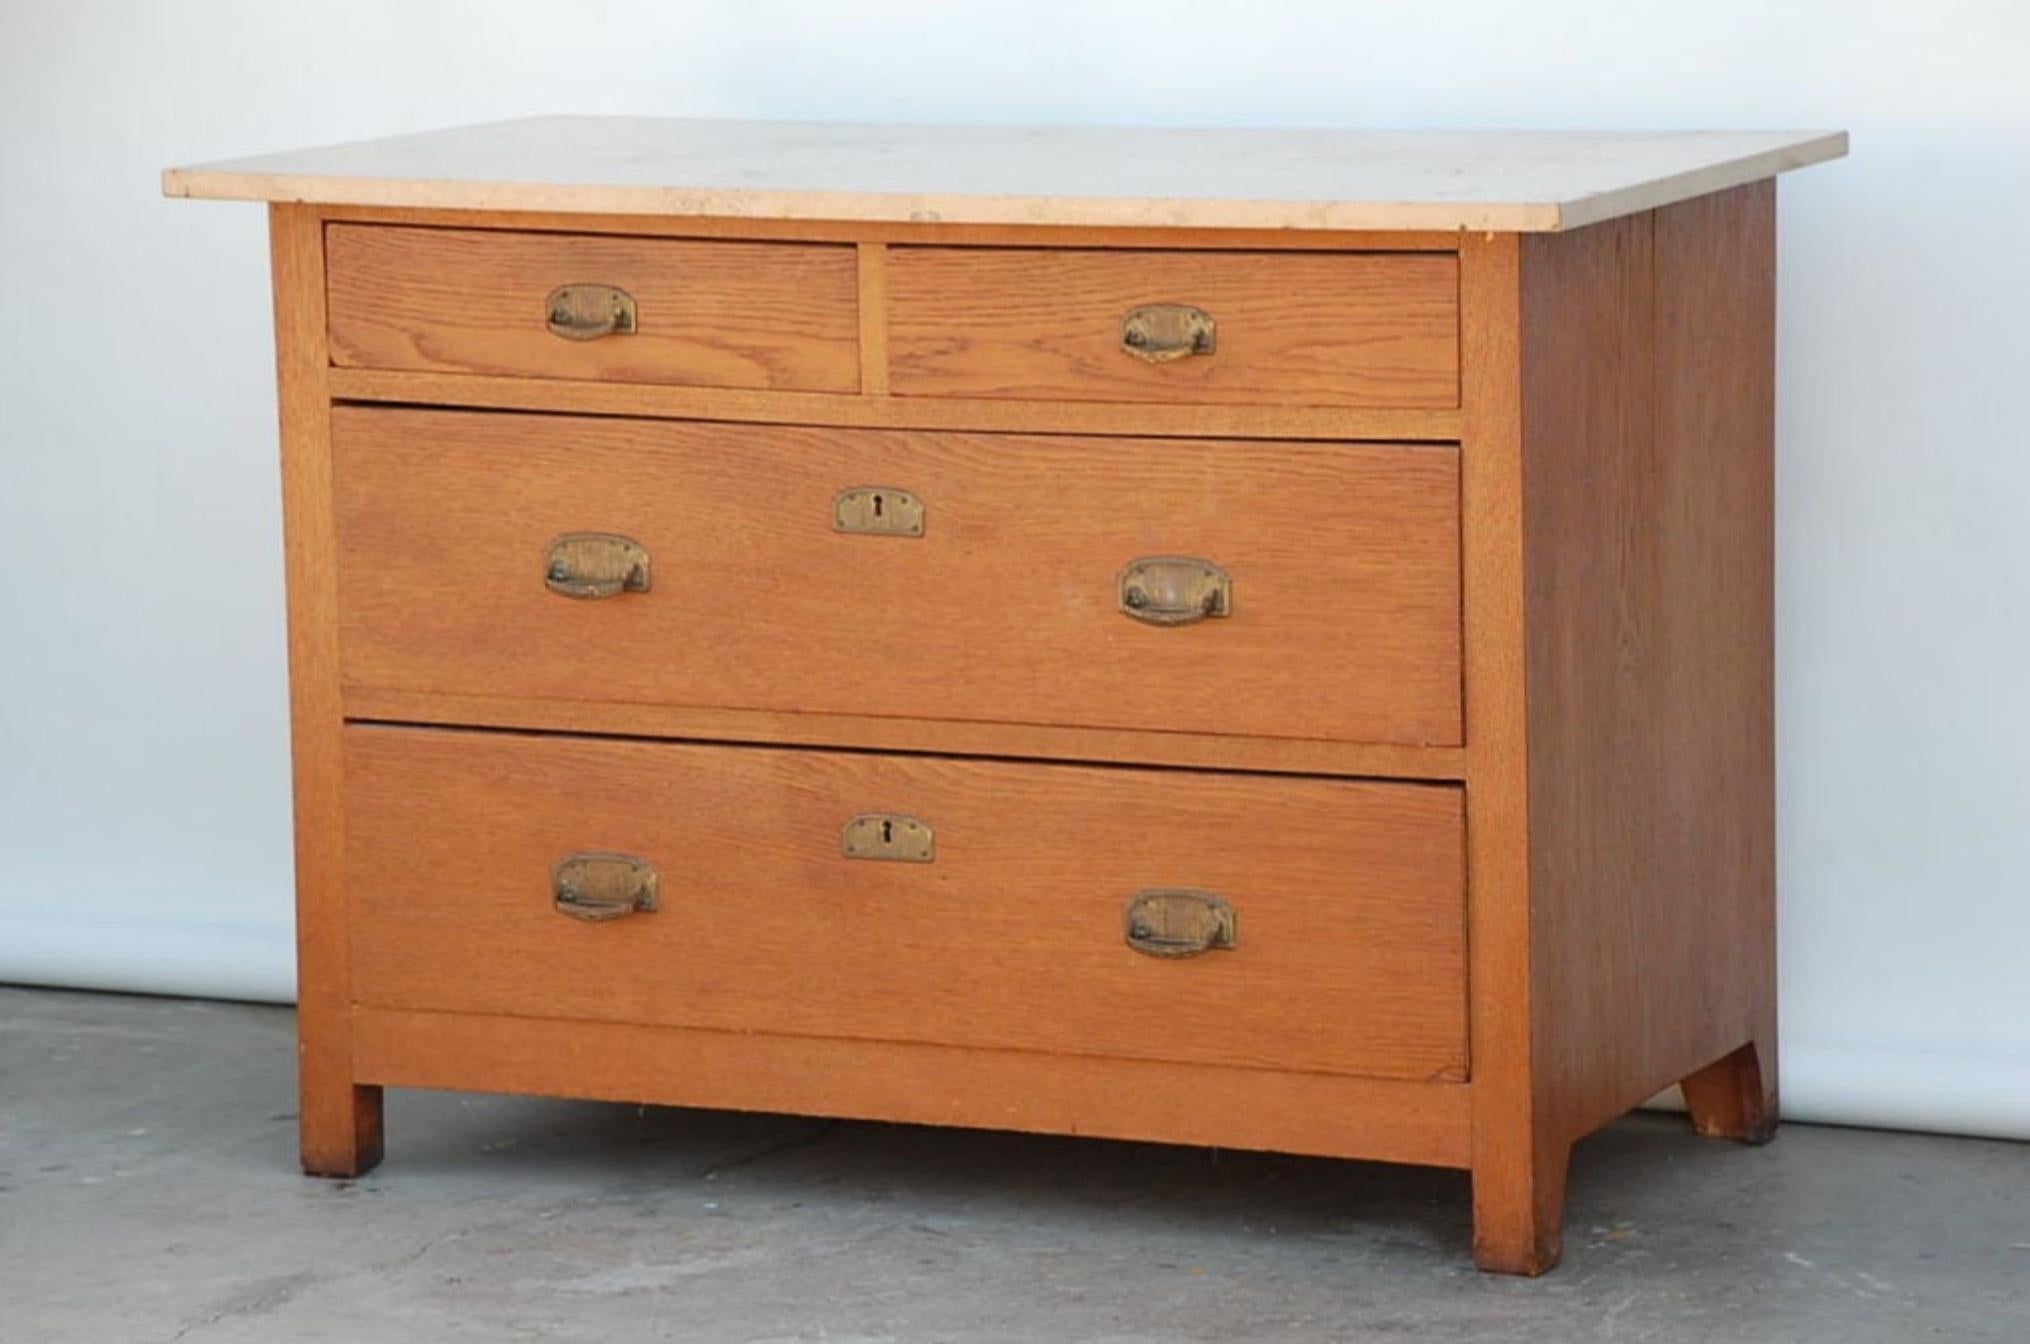 Hard to find pair of Arts & Crafts oak and travertine chest of drawers